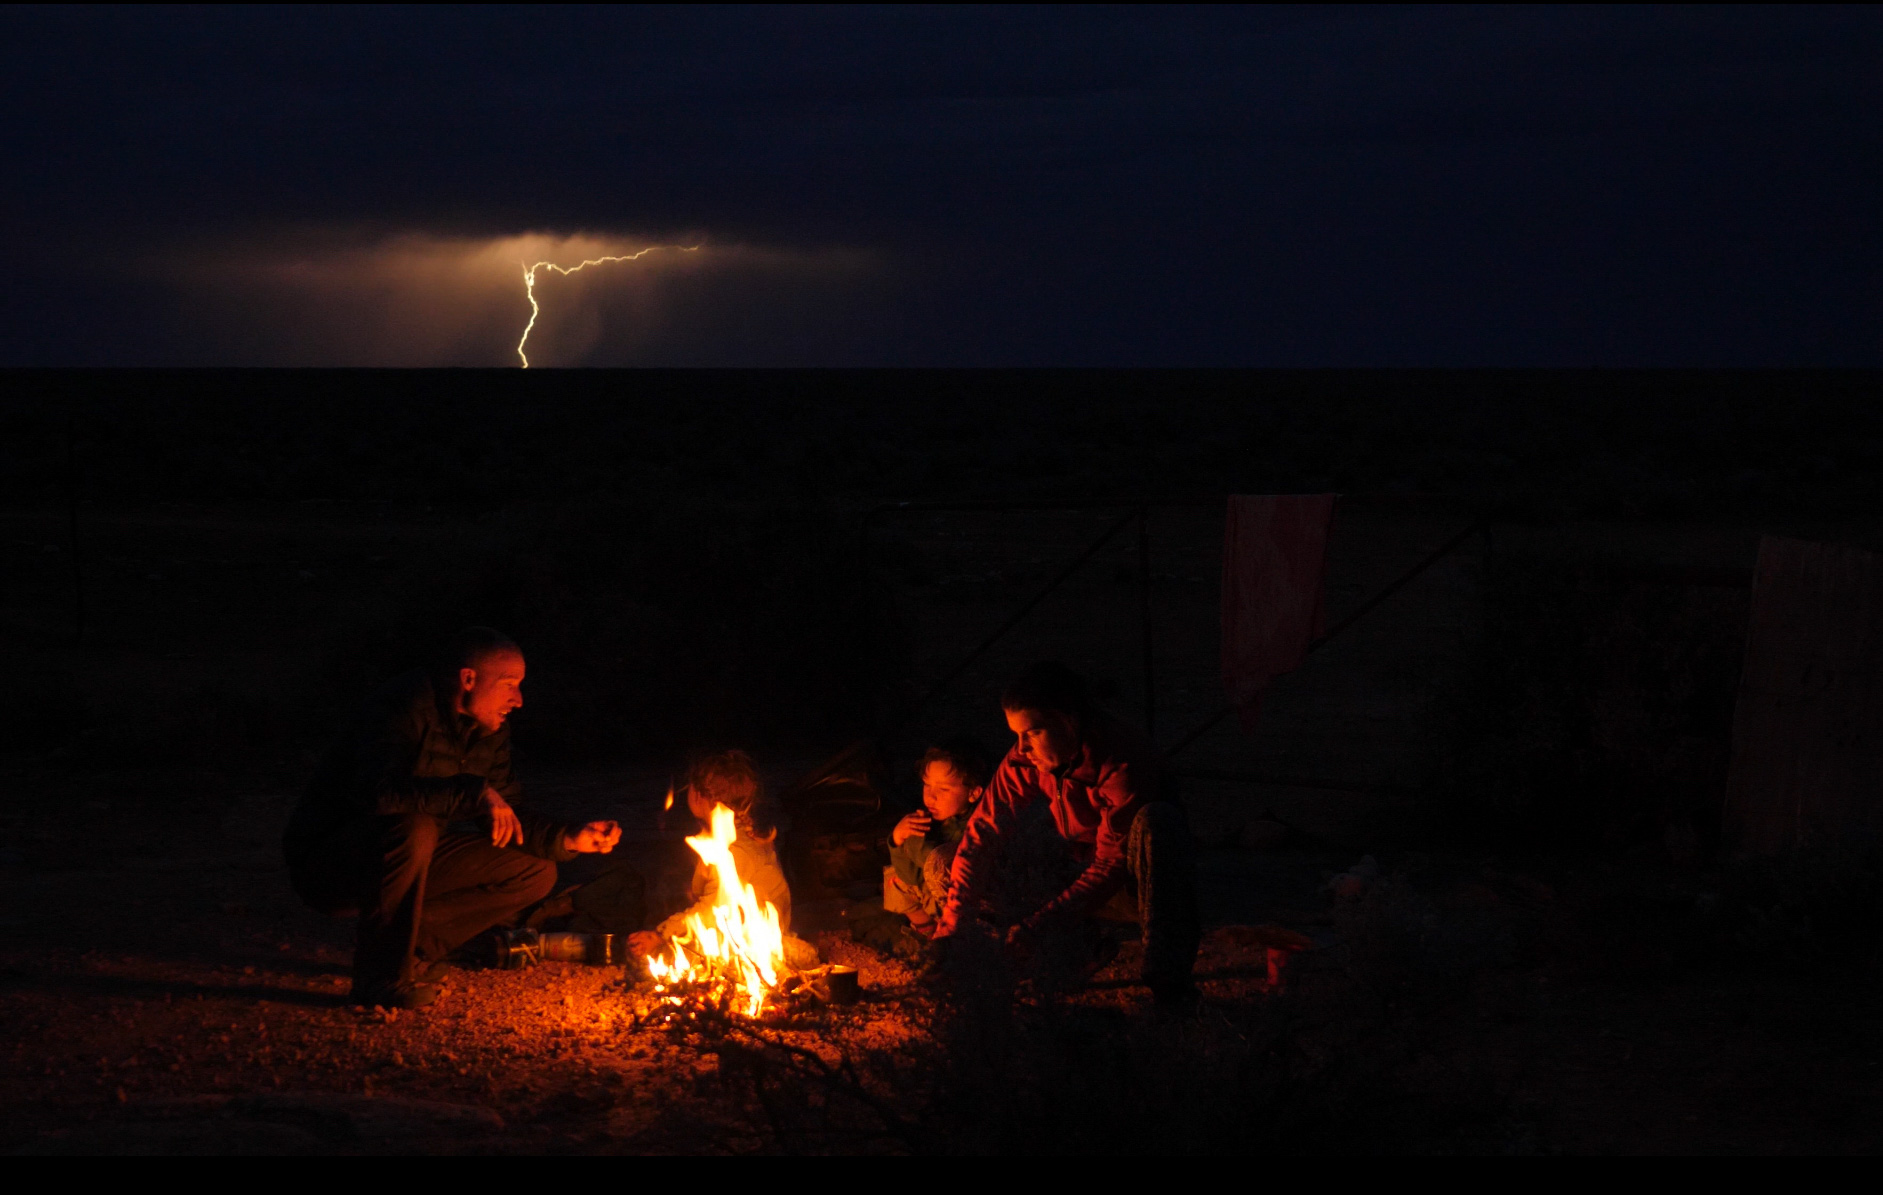 The family sits in a dark nothingness, lit only by a campfire. In the background is a storm with a dramatic lightning bolt piercing the sky. 